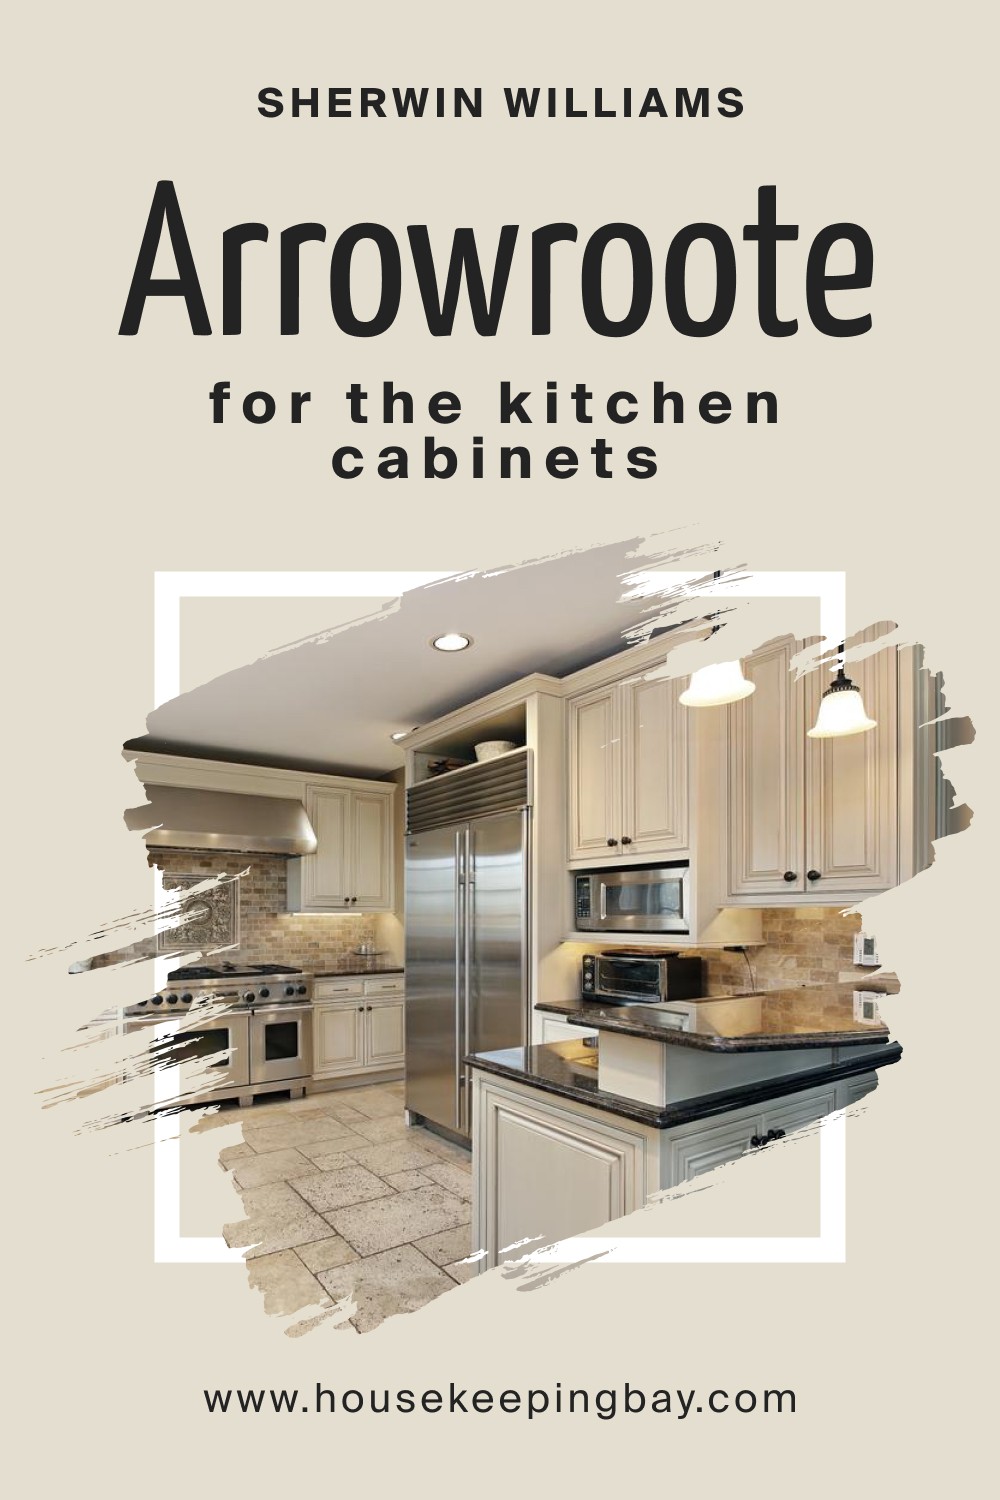 Sherwin Williams. SW 9502 Arrowroote For the Kitchen Cabinets